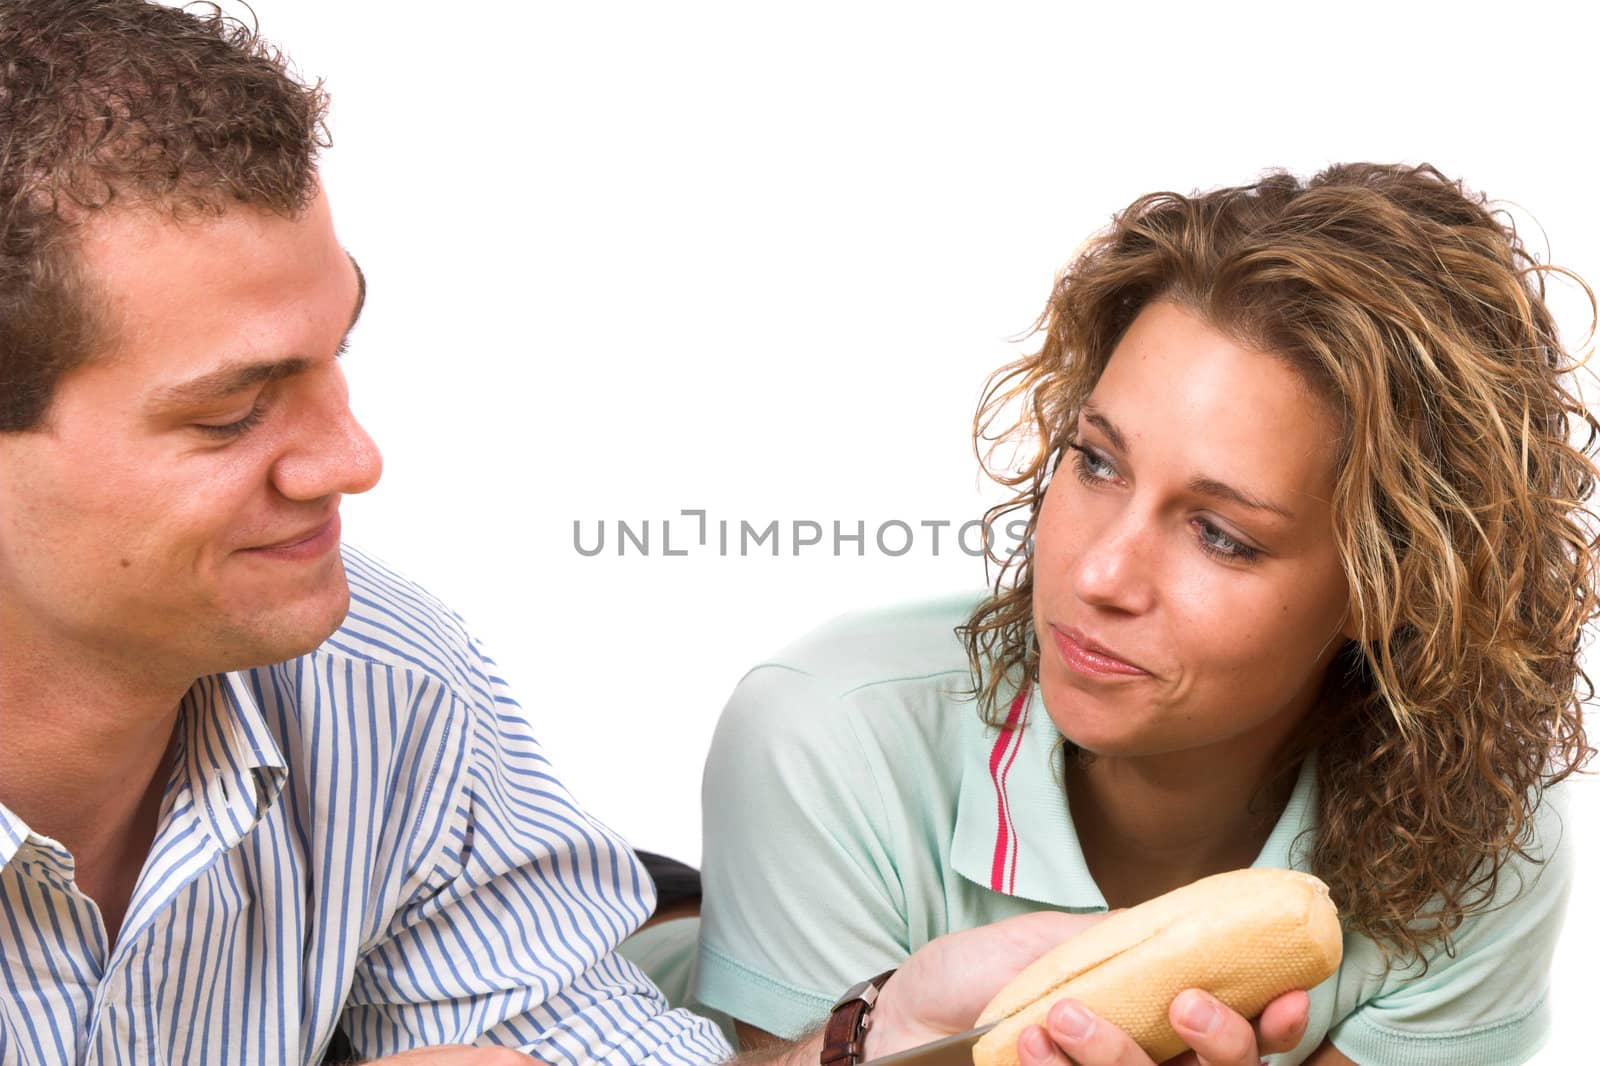 Man cutting the bread while his girlfriend is watching